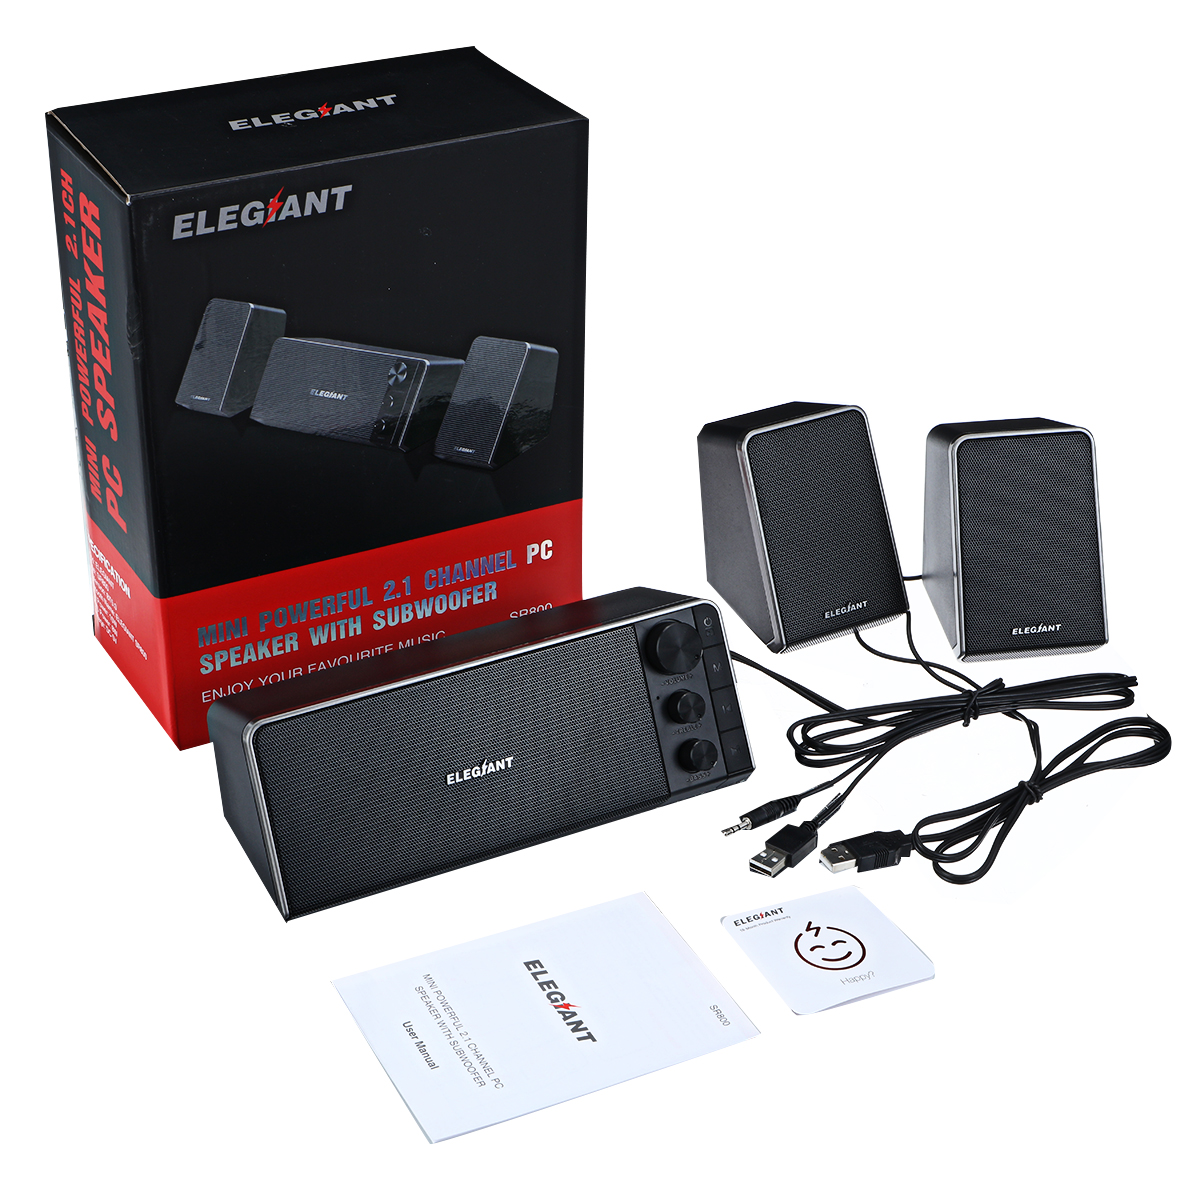 ELEGIANT-SR800-Computer-Speakers-Mini-Powerful-21-channel-PC-bluetooth-50-Speaker-with-Subwoofer-1931134-10